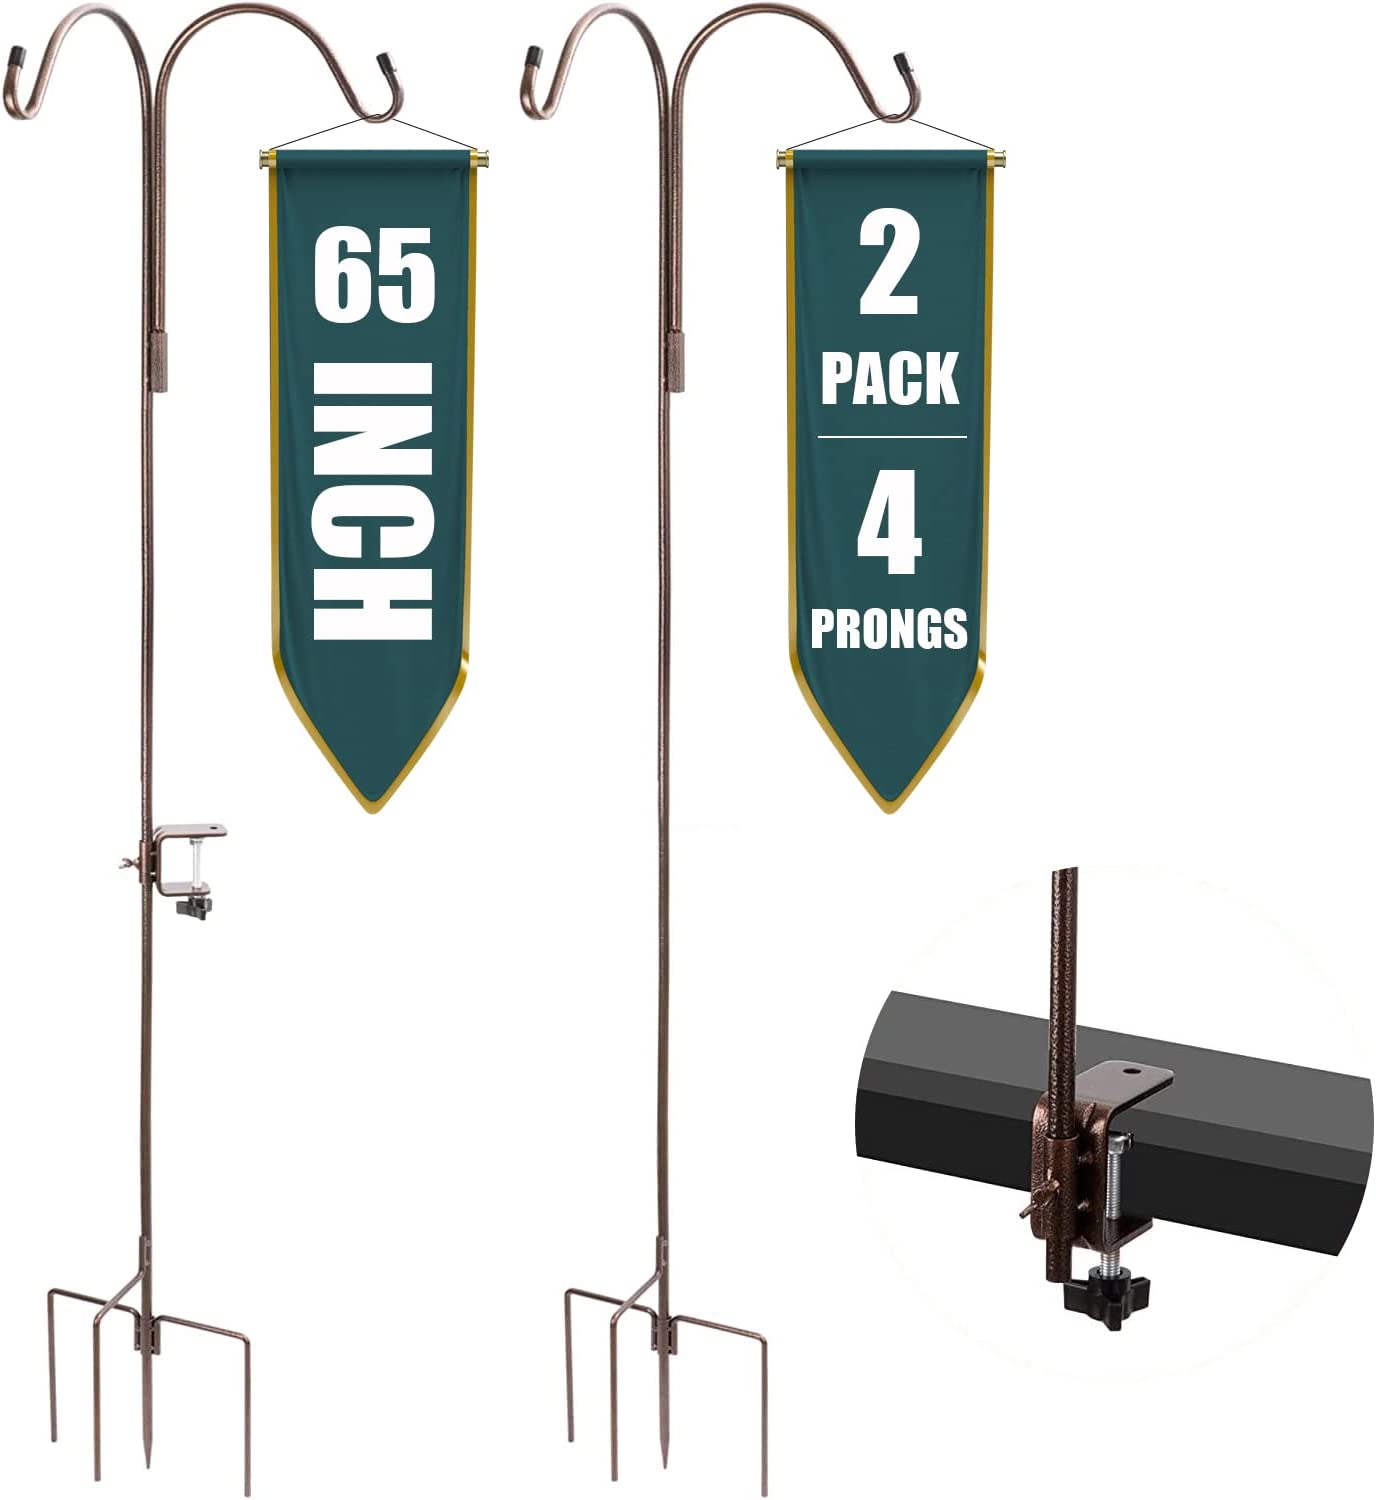 Double Shepherds Hook Adjustable Bird Feeder Pole for Outdoor with 4 Prongs Base,65 Inch Heavy Duty Garden Hanging Plant Hooks Stand Outside for Plant Hanger Wedding Decoration (Pack of 2) - image 1 of 7